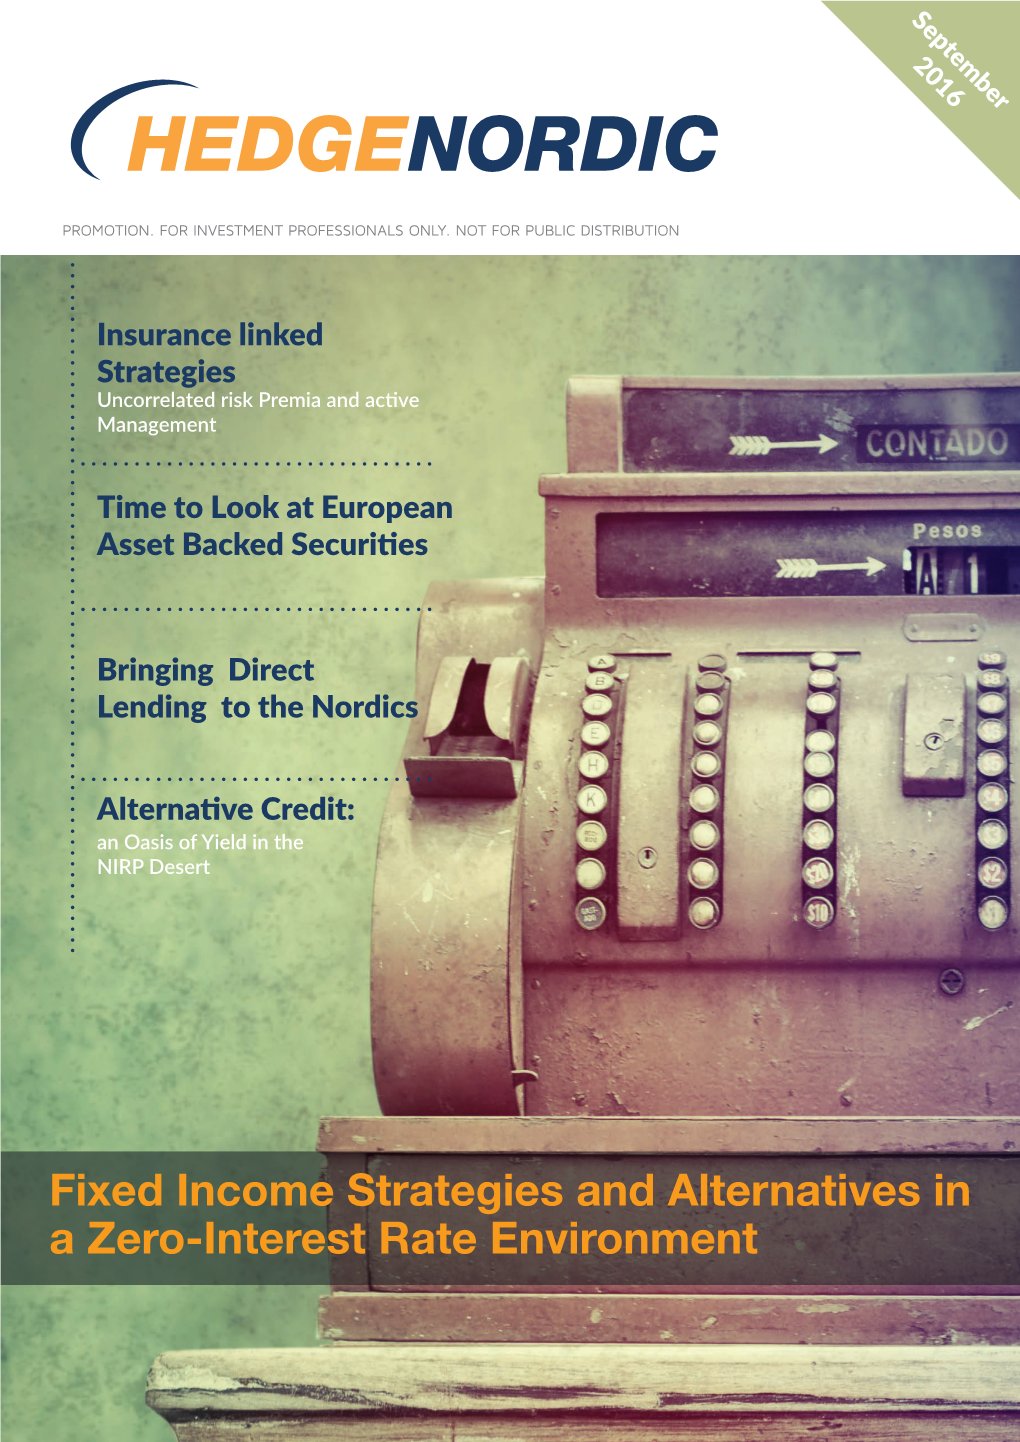 Fixed Income Strategies and Alternatives in a Zero-Interest Rate Environment - September 2016 - September 2016